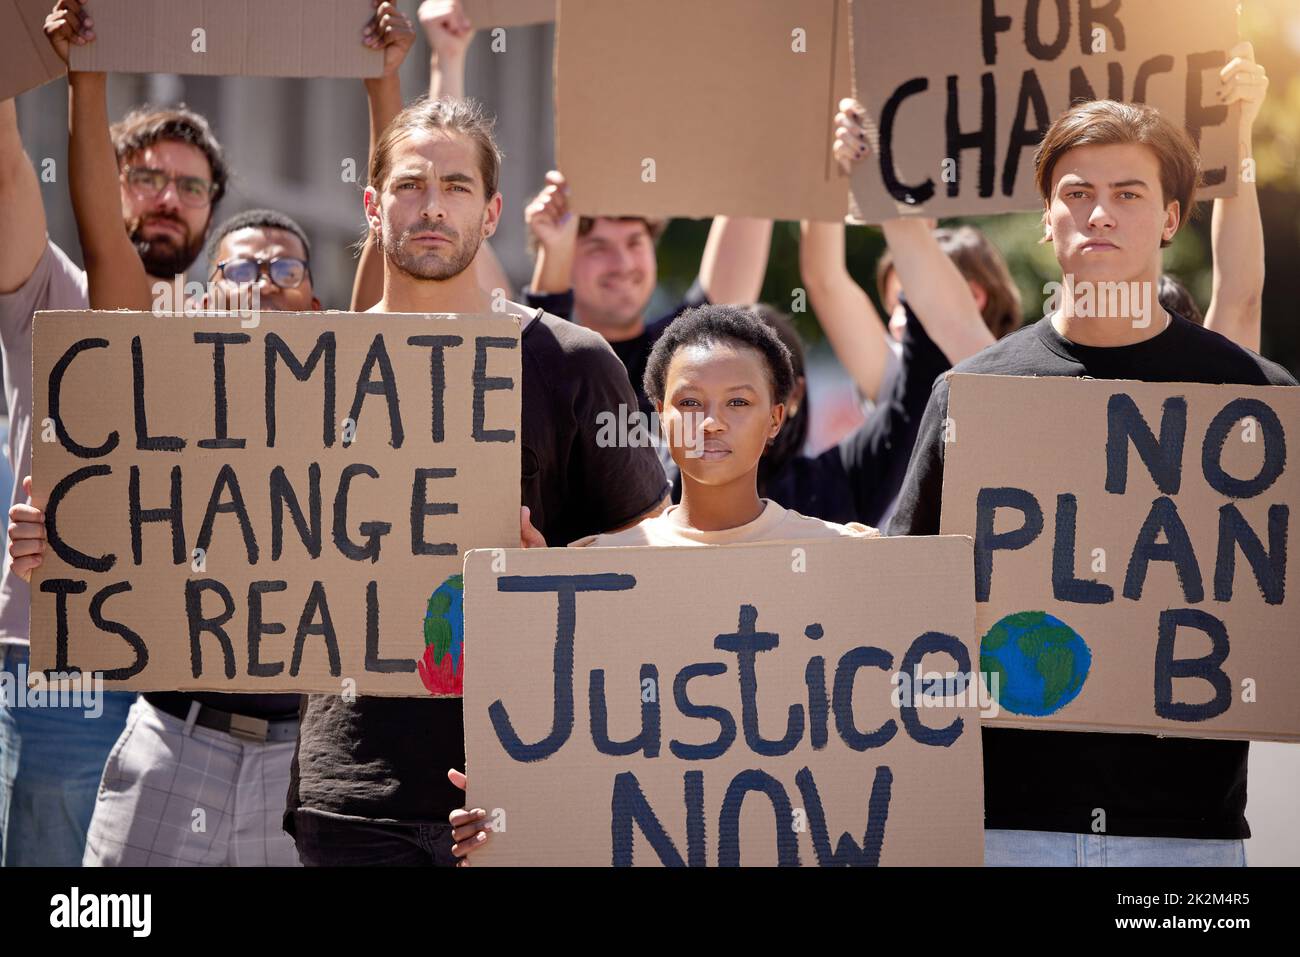 We only have one planet. Shot of a group of people protesting climate change. Stock Photo